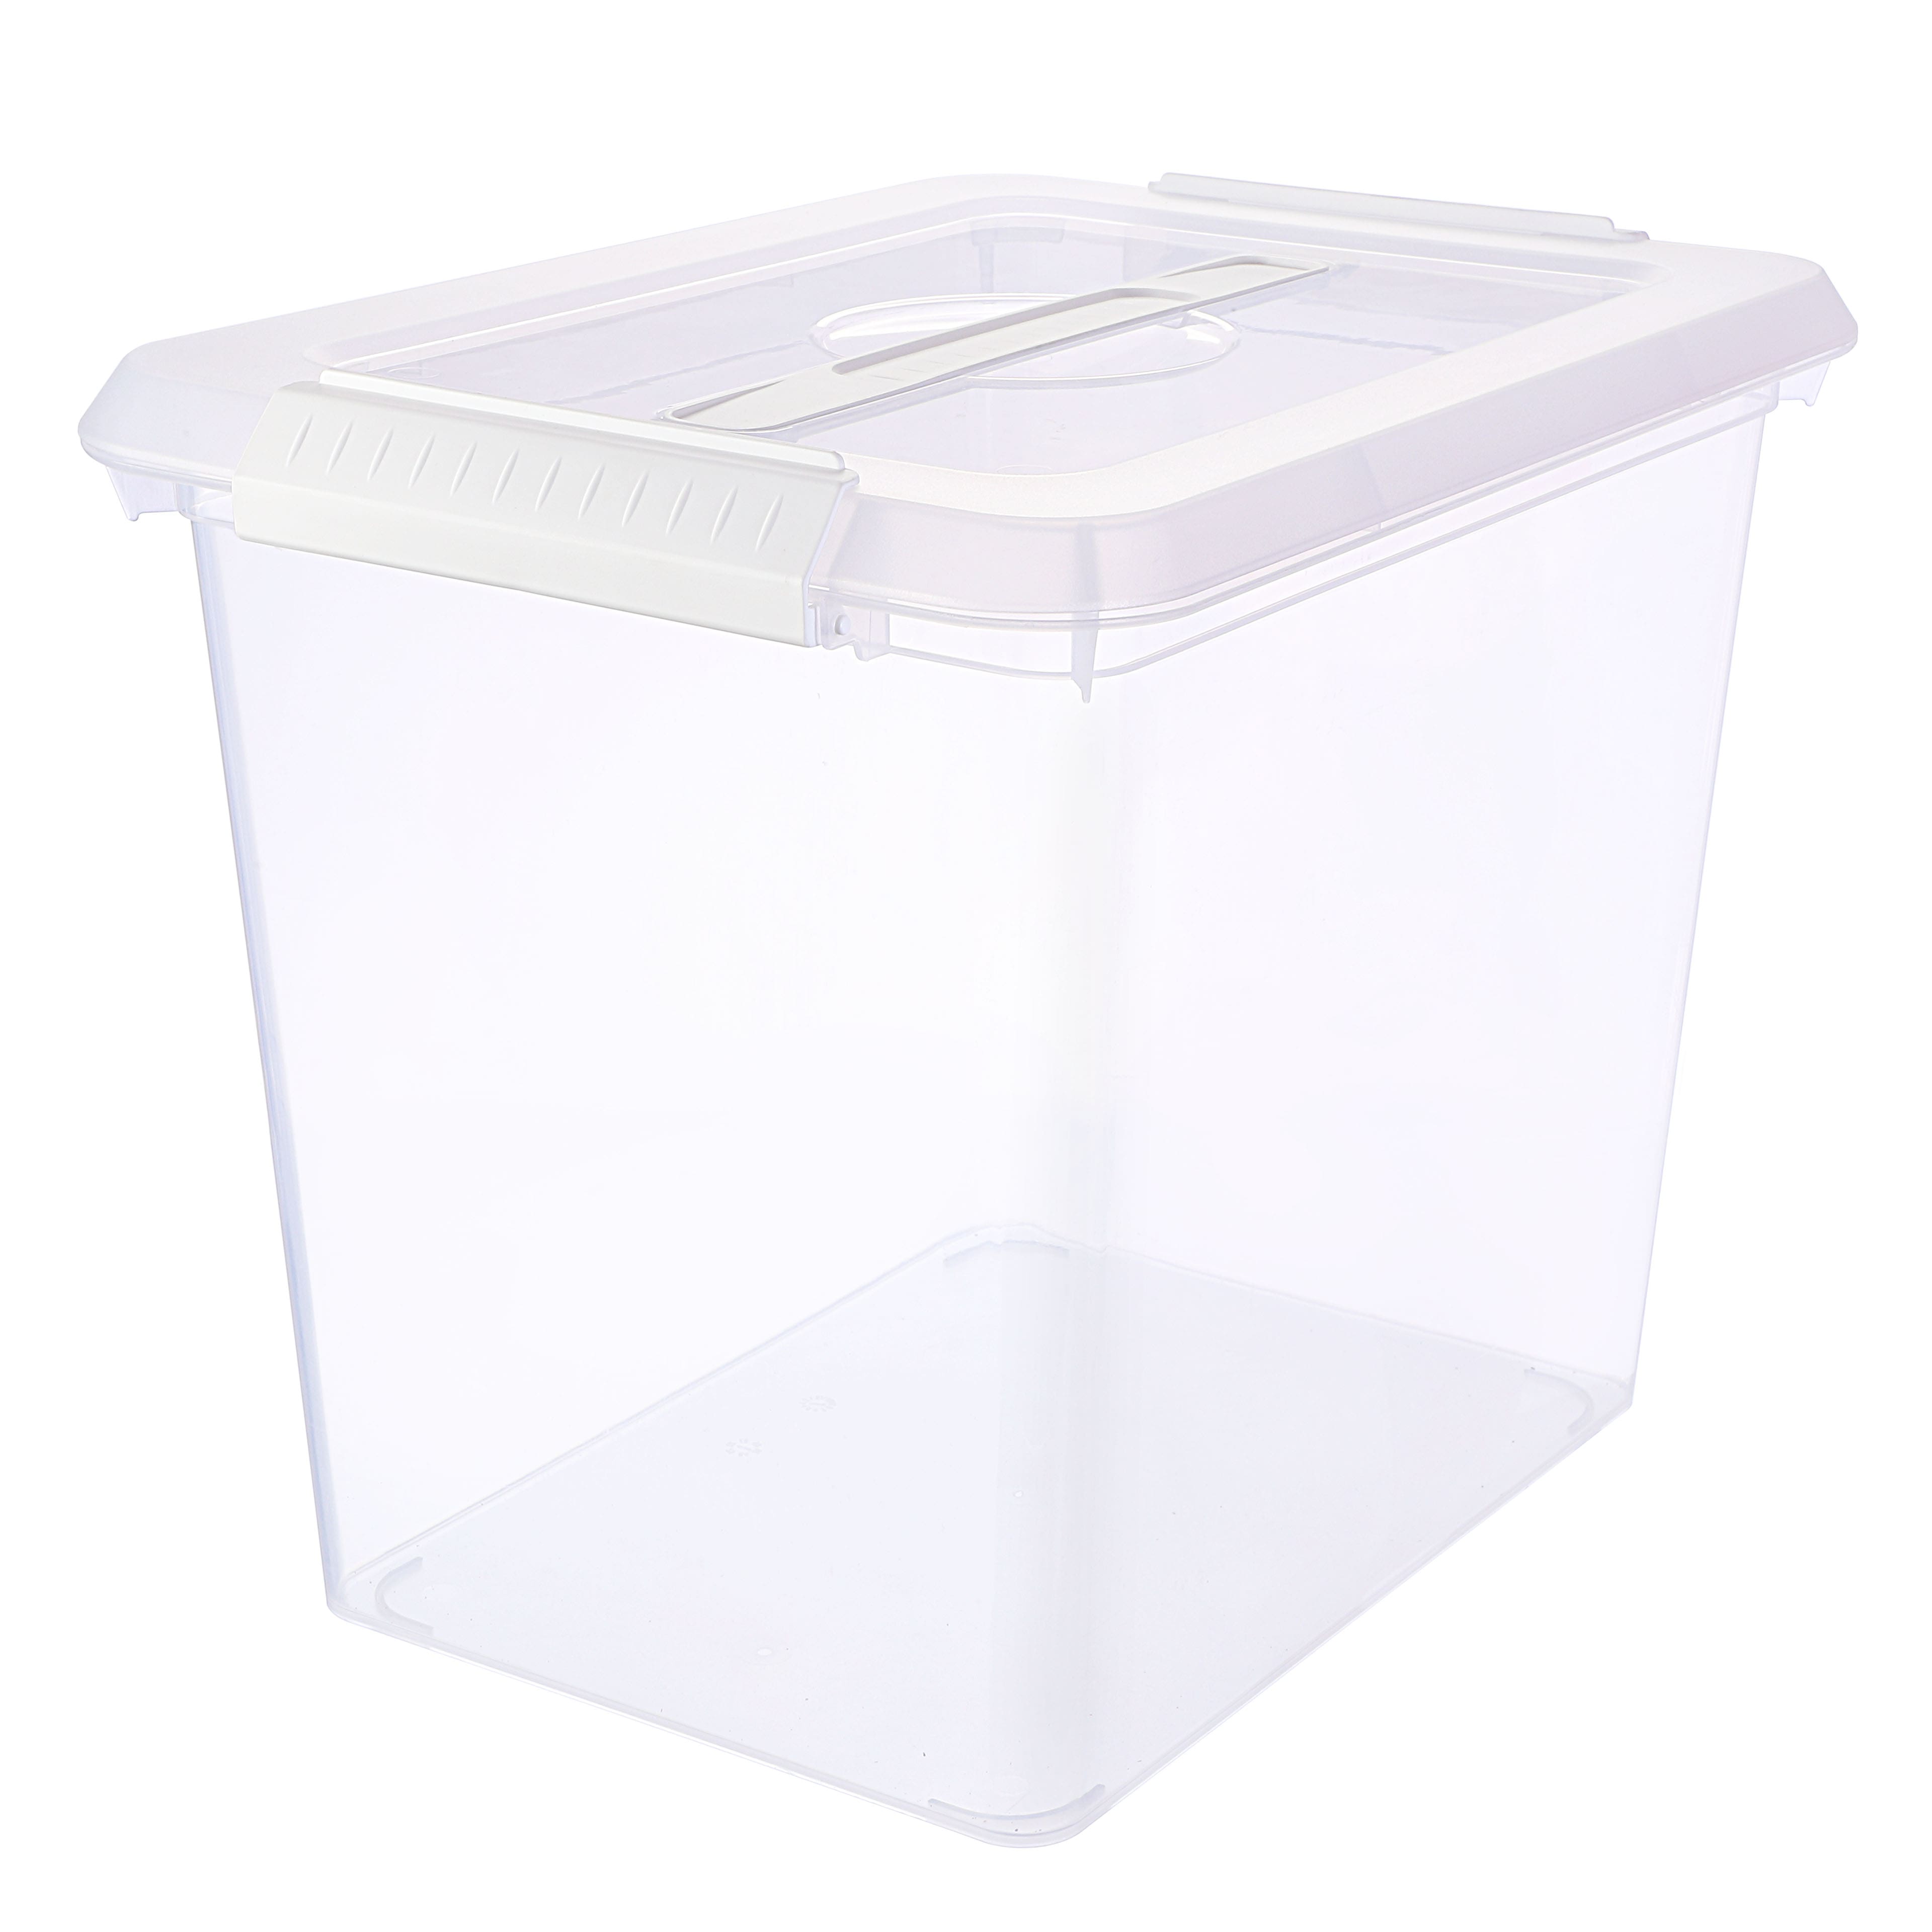 6 Pack: 26qt. Storage Bin with Lid by Simply Tidy™